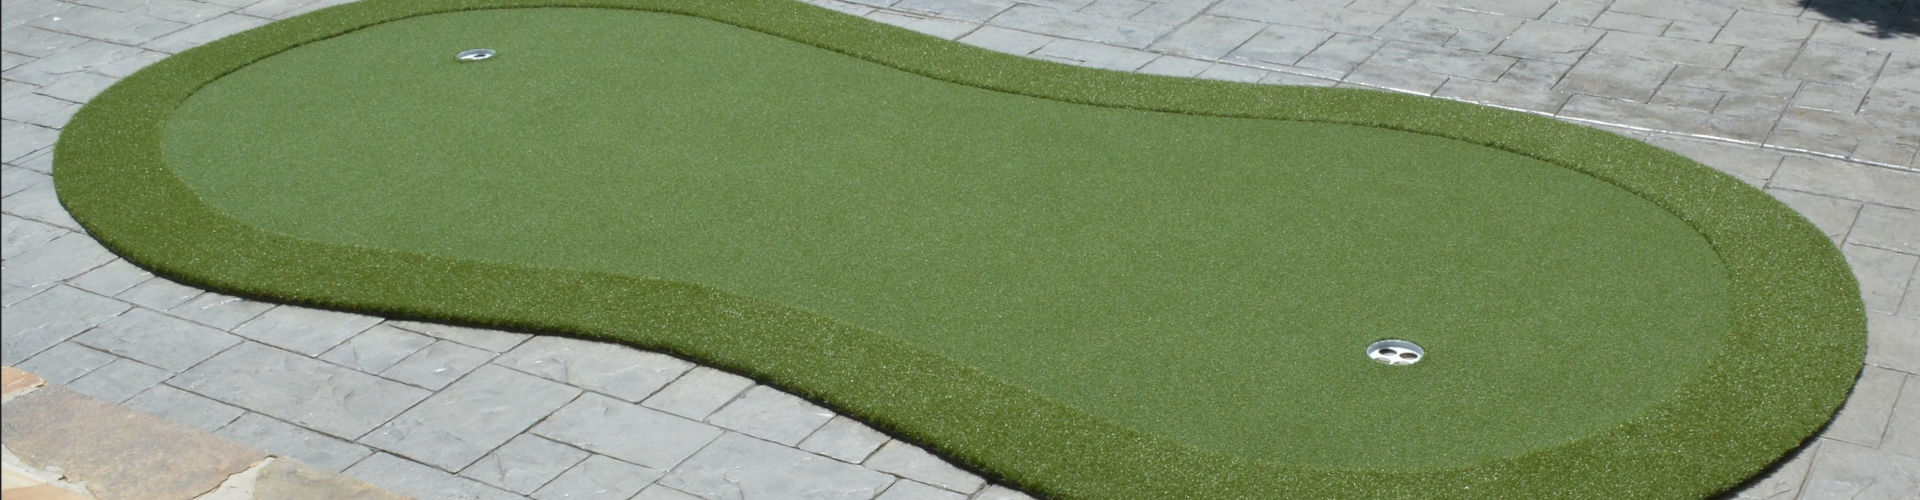 Southwest Greens of Michigan Portable Putting Green